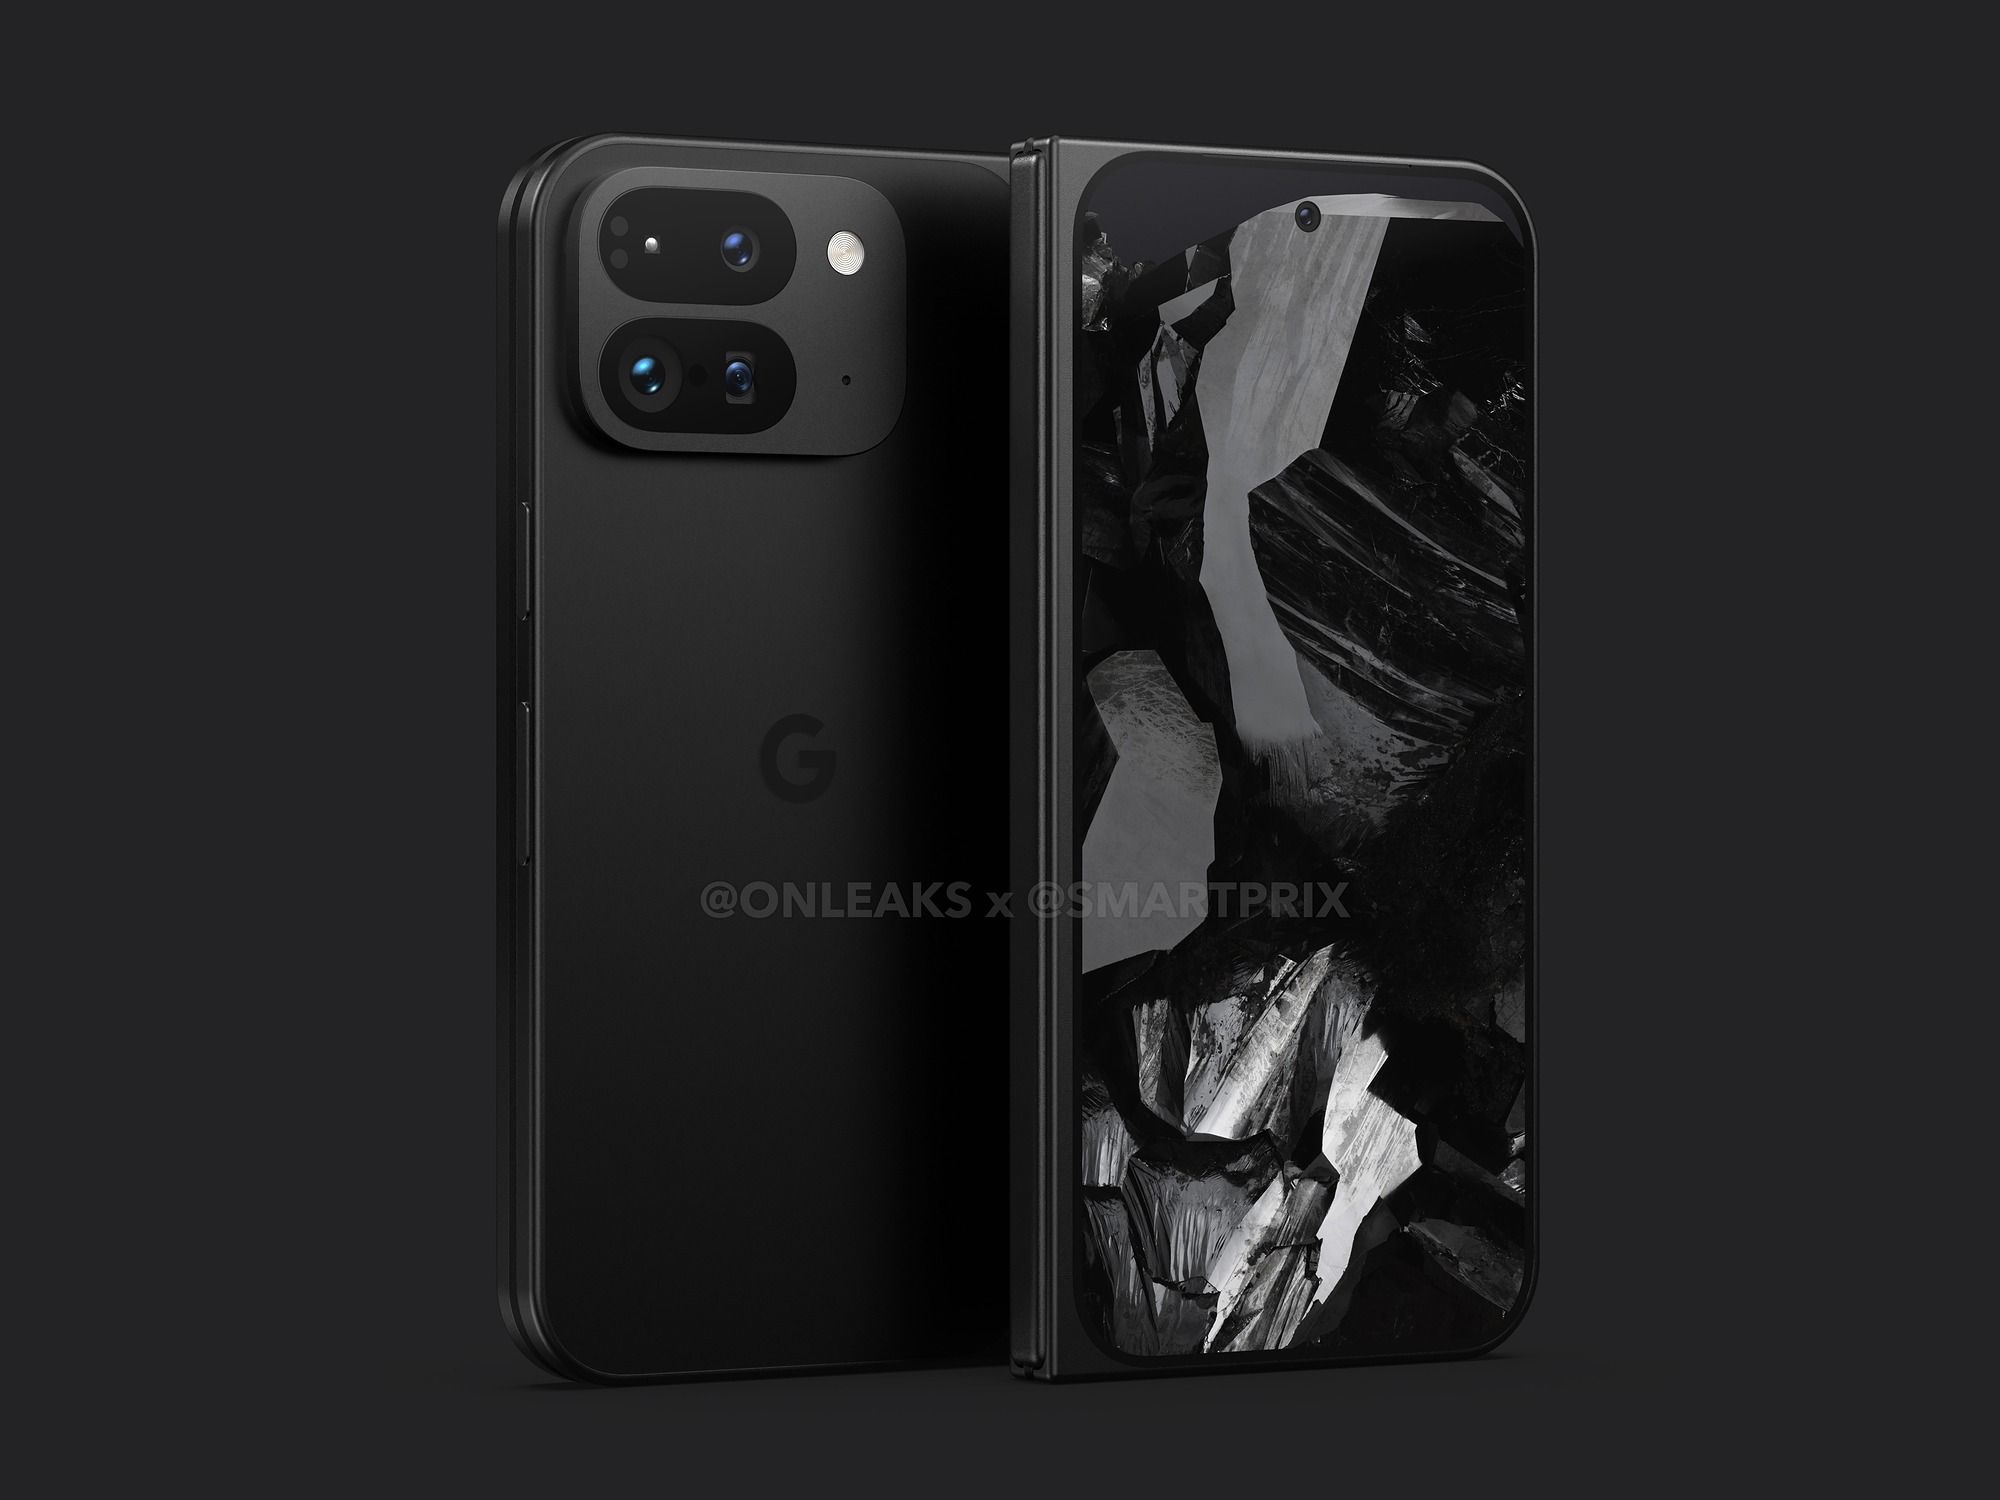 Google's Pixel Fold 2 renders showing the phone's front and back when closed